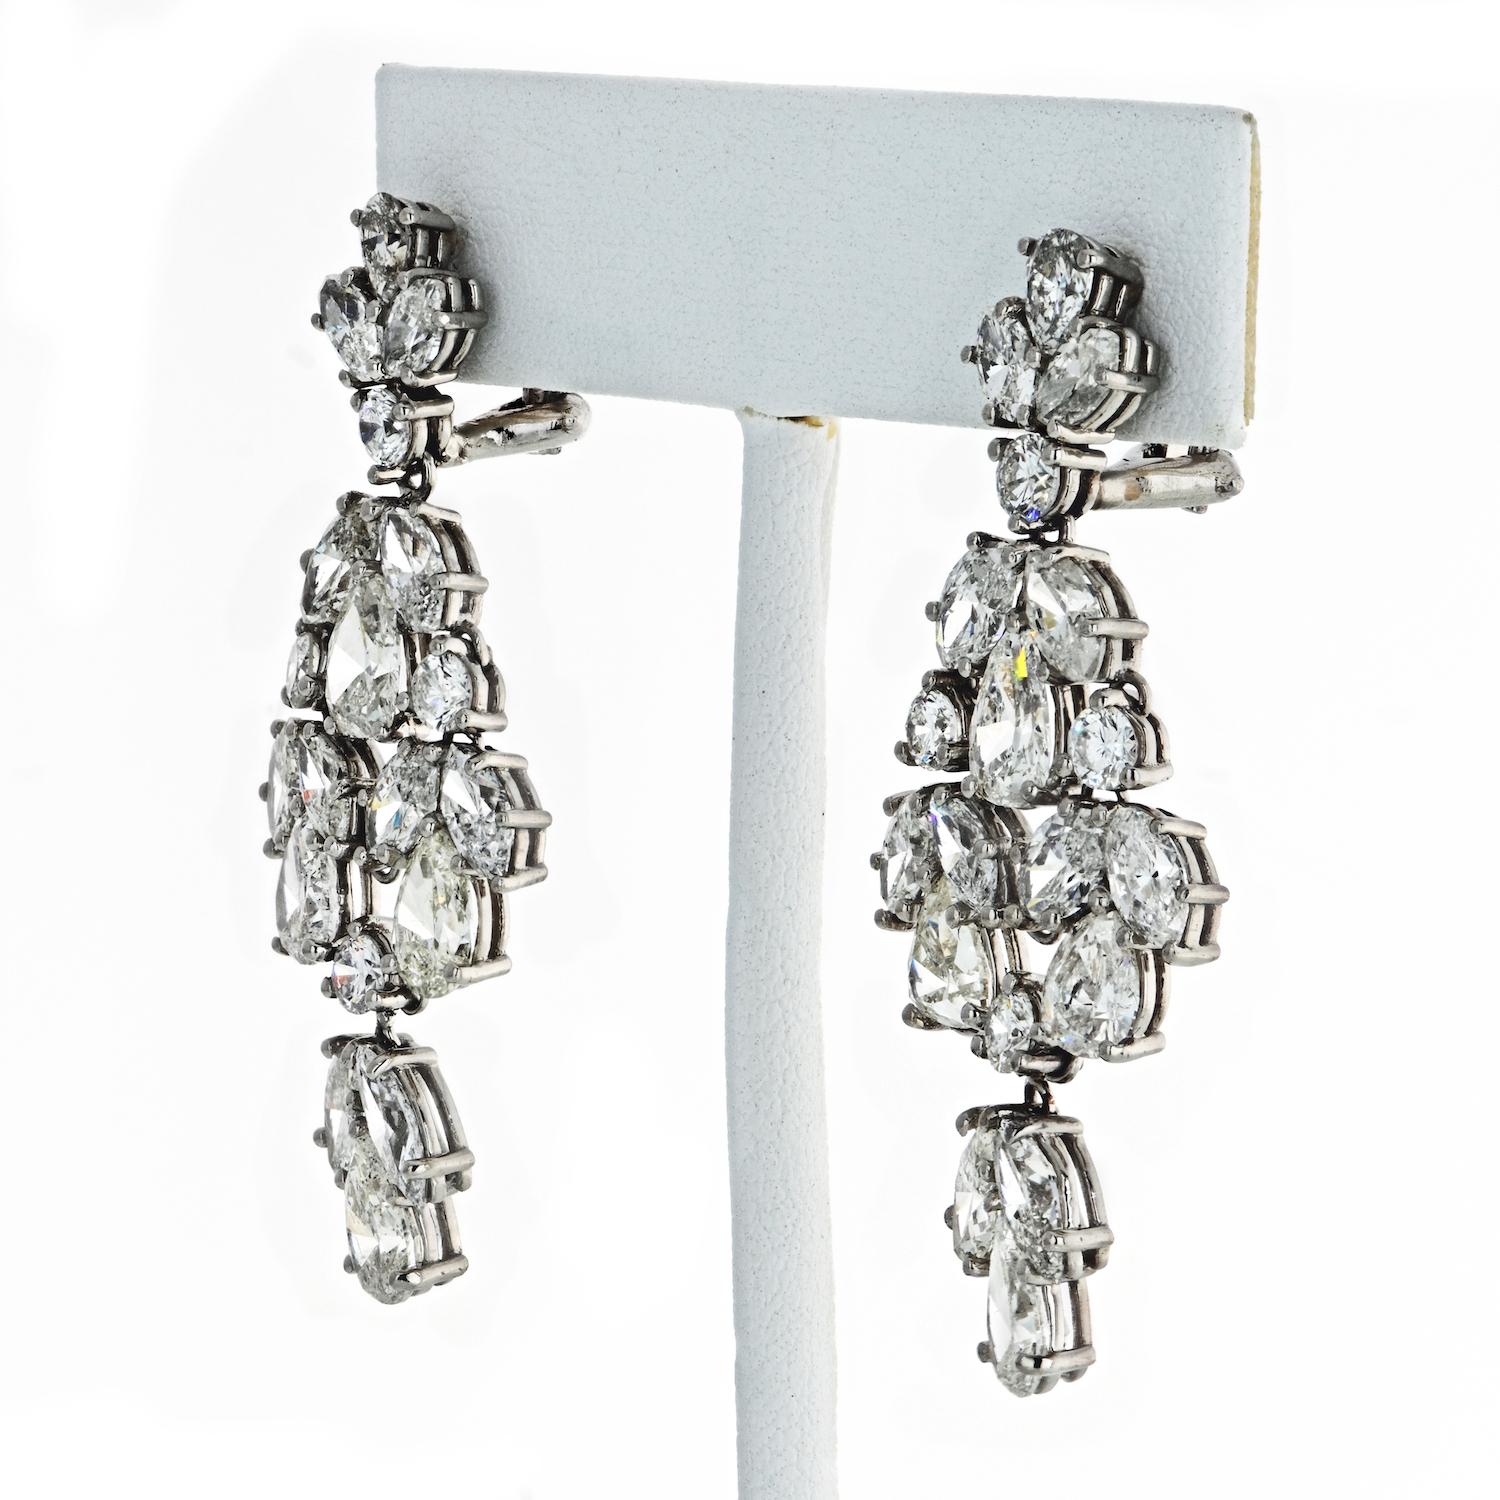 A pair of American Mid-20th Century platinum chandelier earrings with 20 carats worth of diamonds. The articulated earrings have 10 pear-cut diamonds, 8 round brilliant cuts, 20 marquise cuts, and 20 round-cut diamonds. These earrings give out an